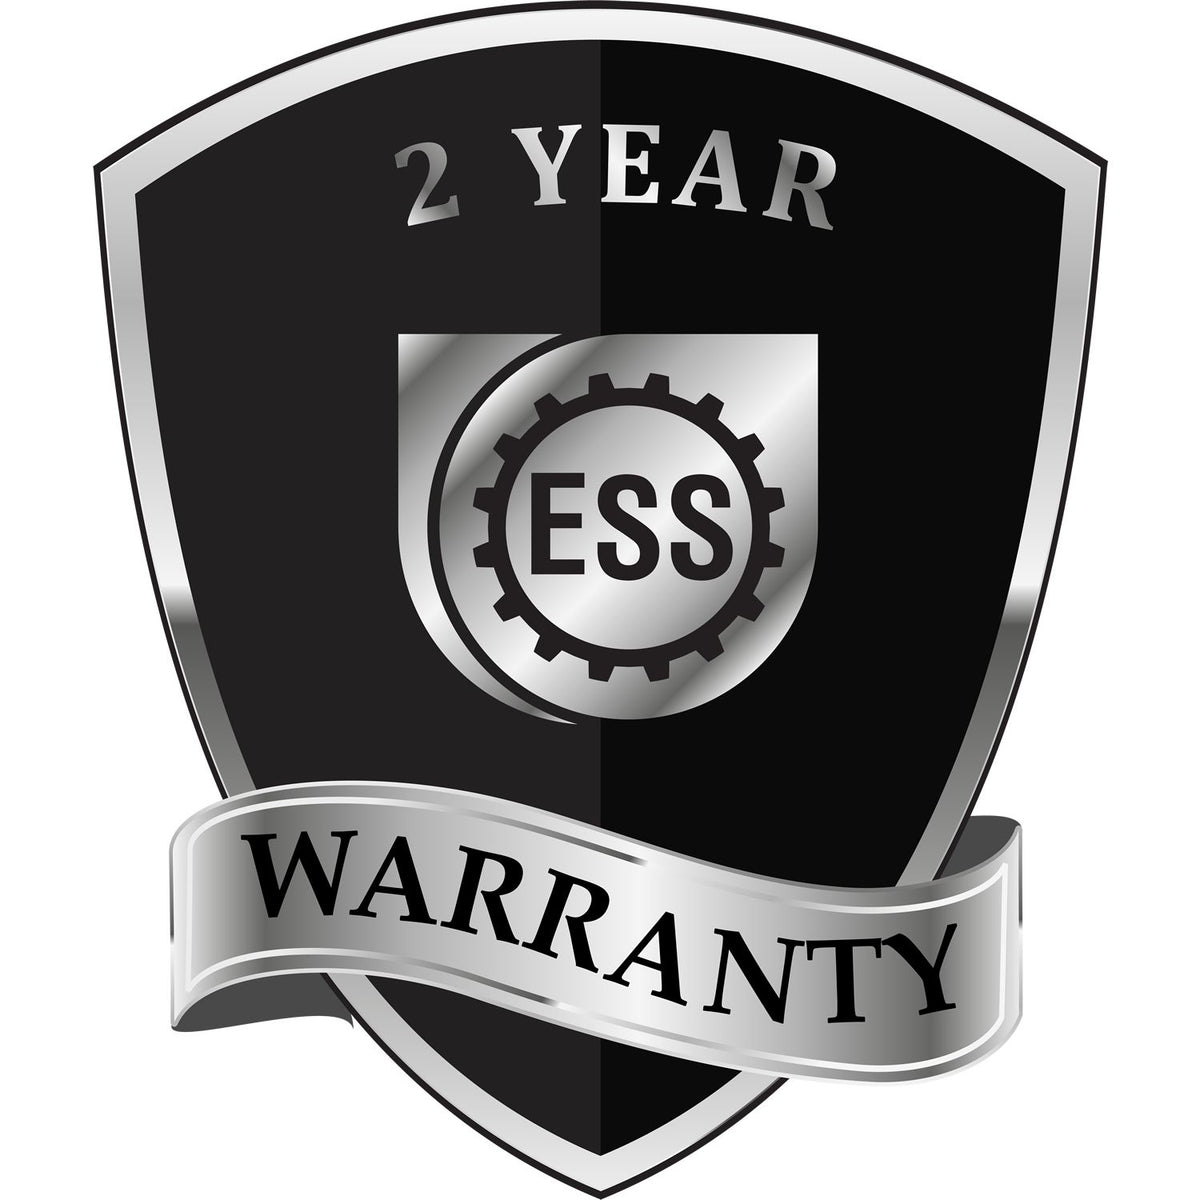 A black and silver badge or emblem showing warranty information for the Soft Connecticut Professional Geologist Seal